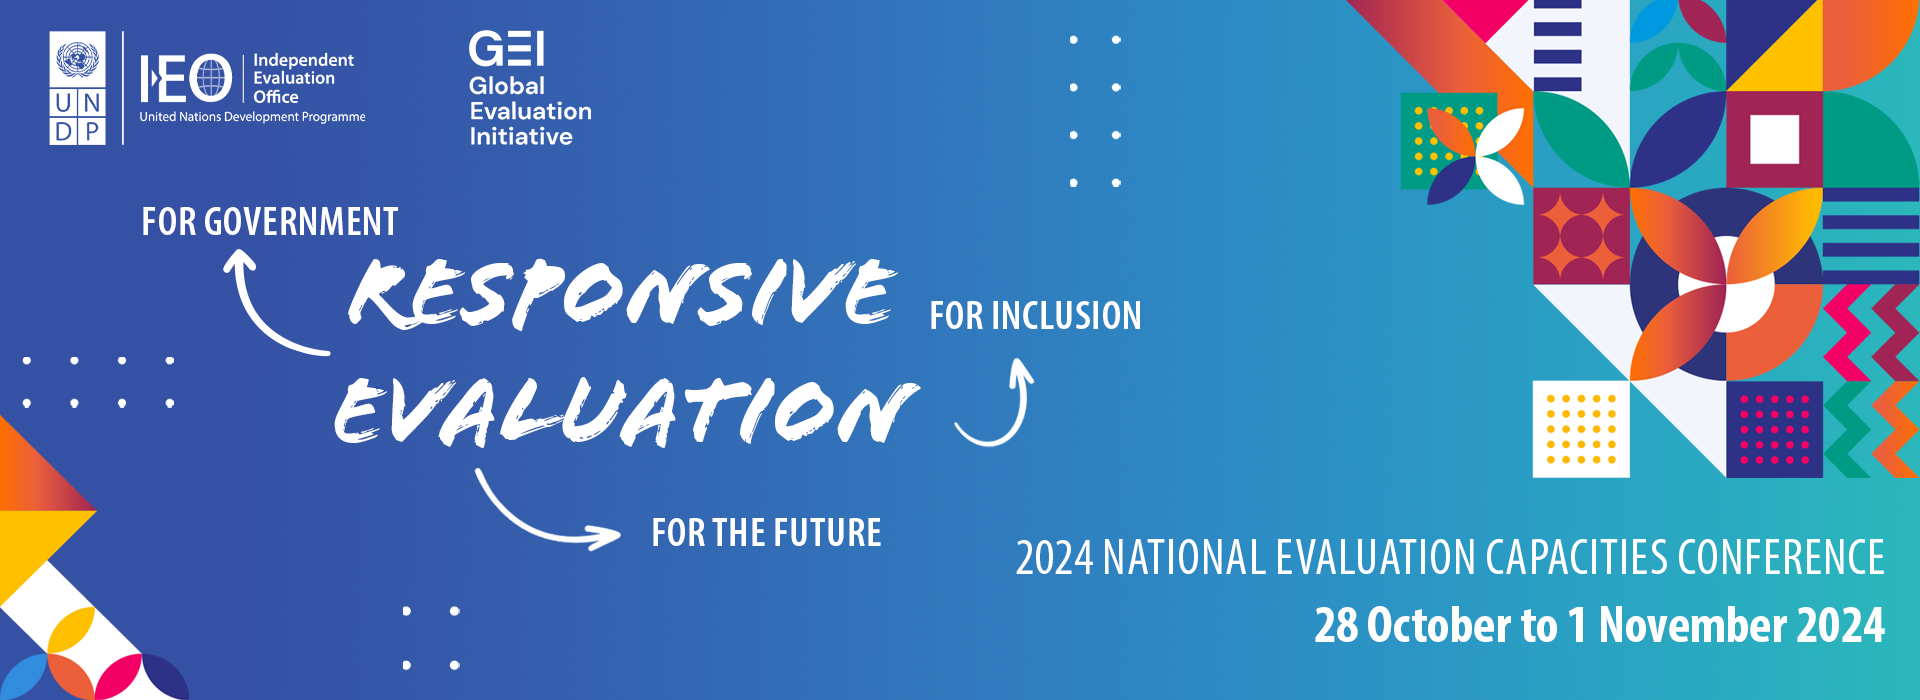 Save the date for NEC 2024